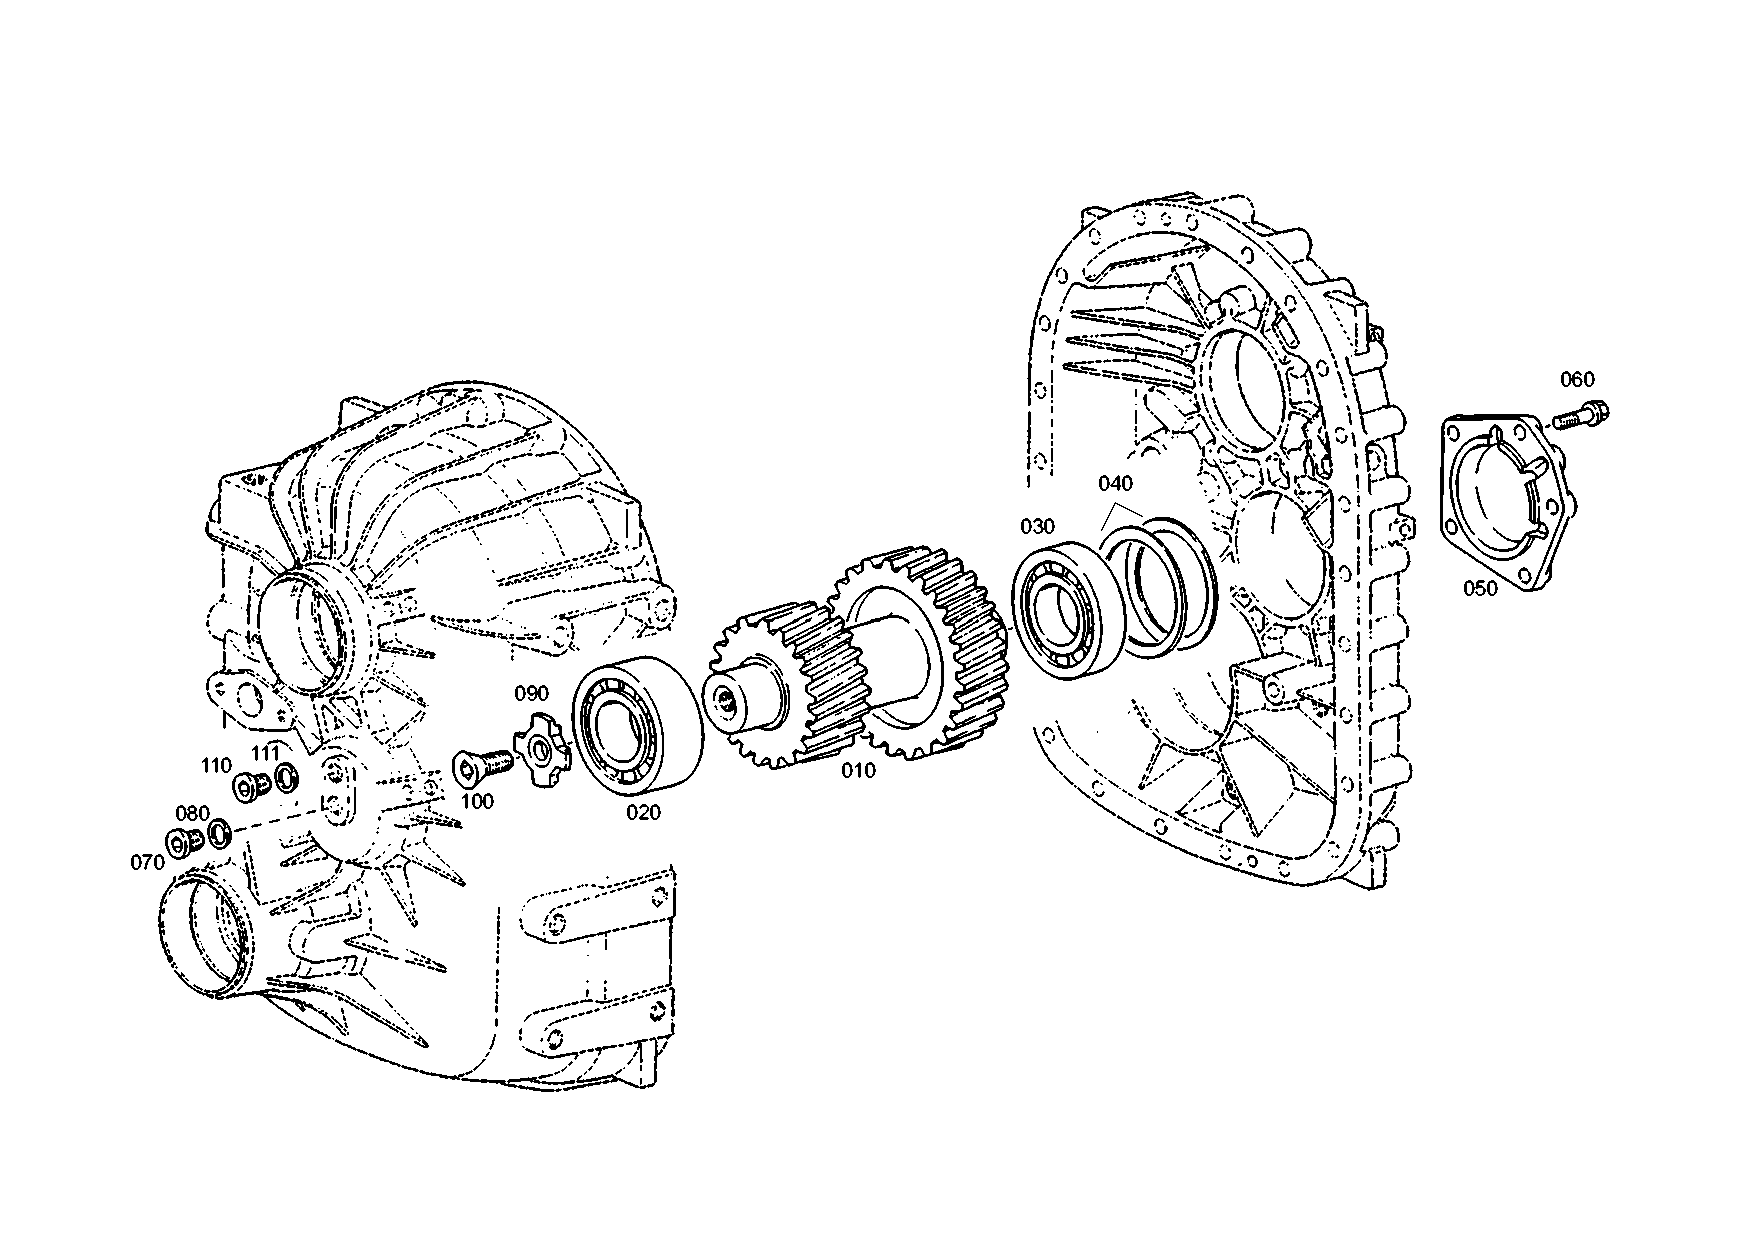 drawing for MARMON Herring MVG751061 - DOUBLE GEAR